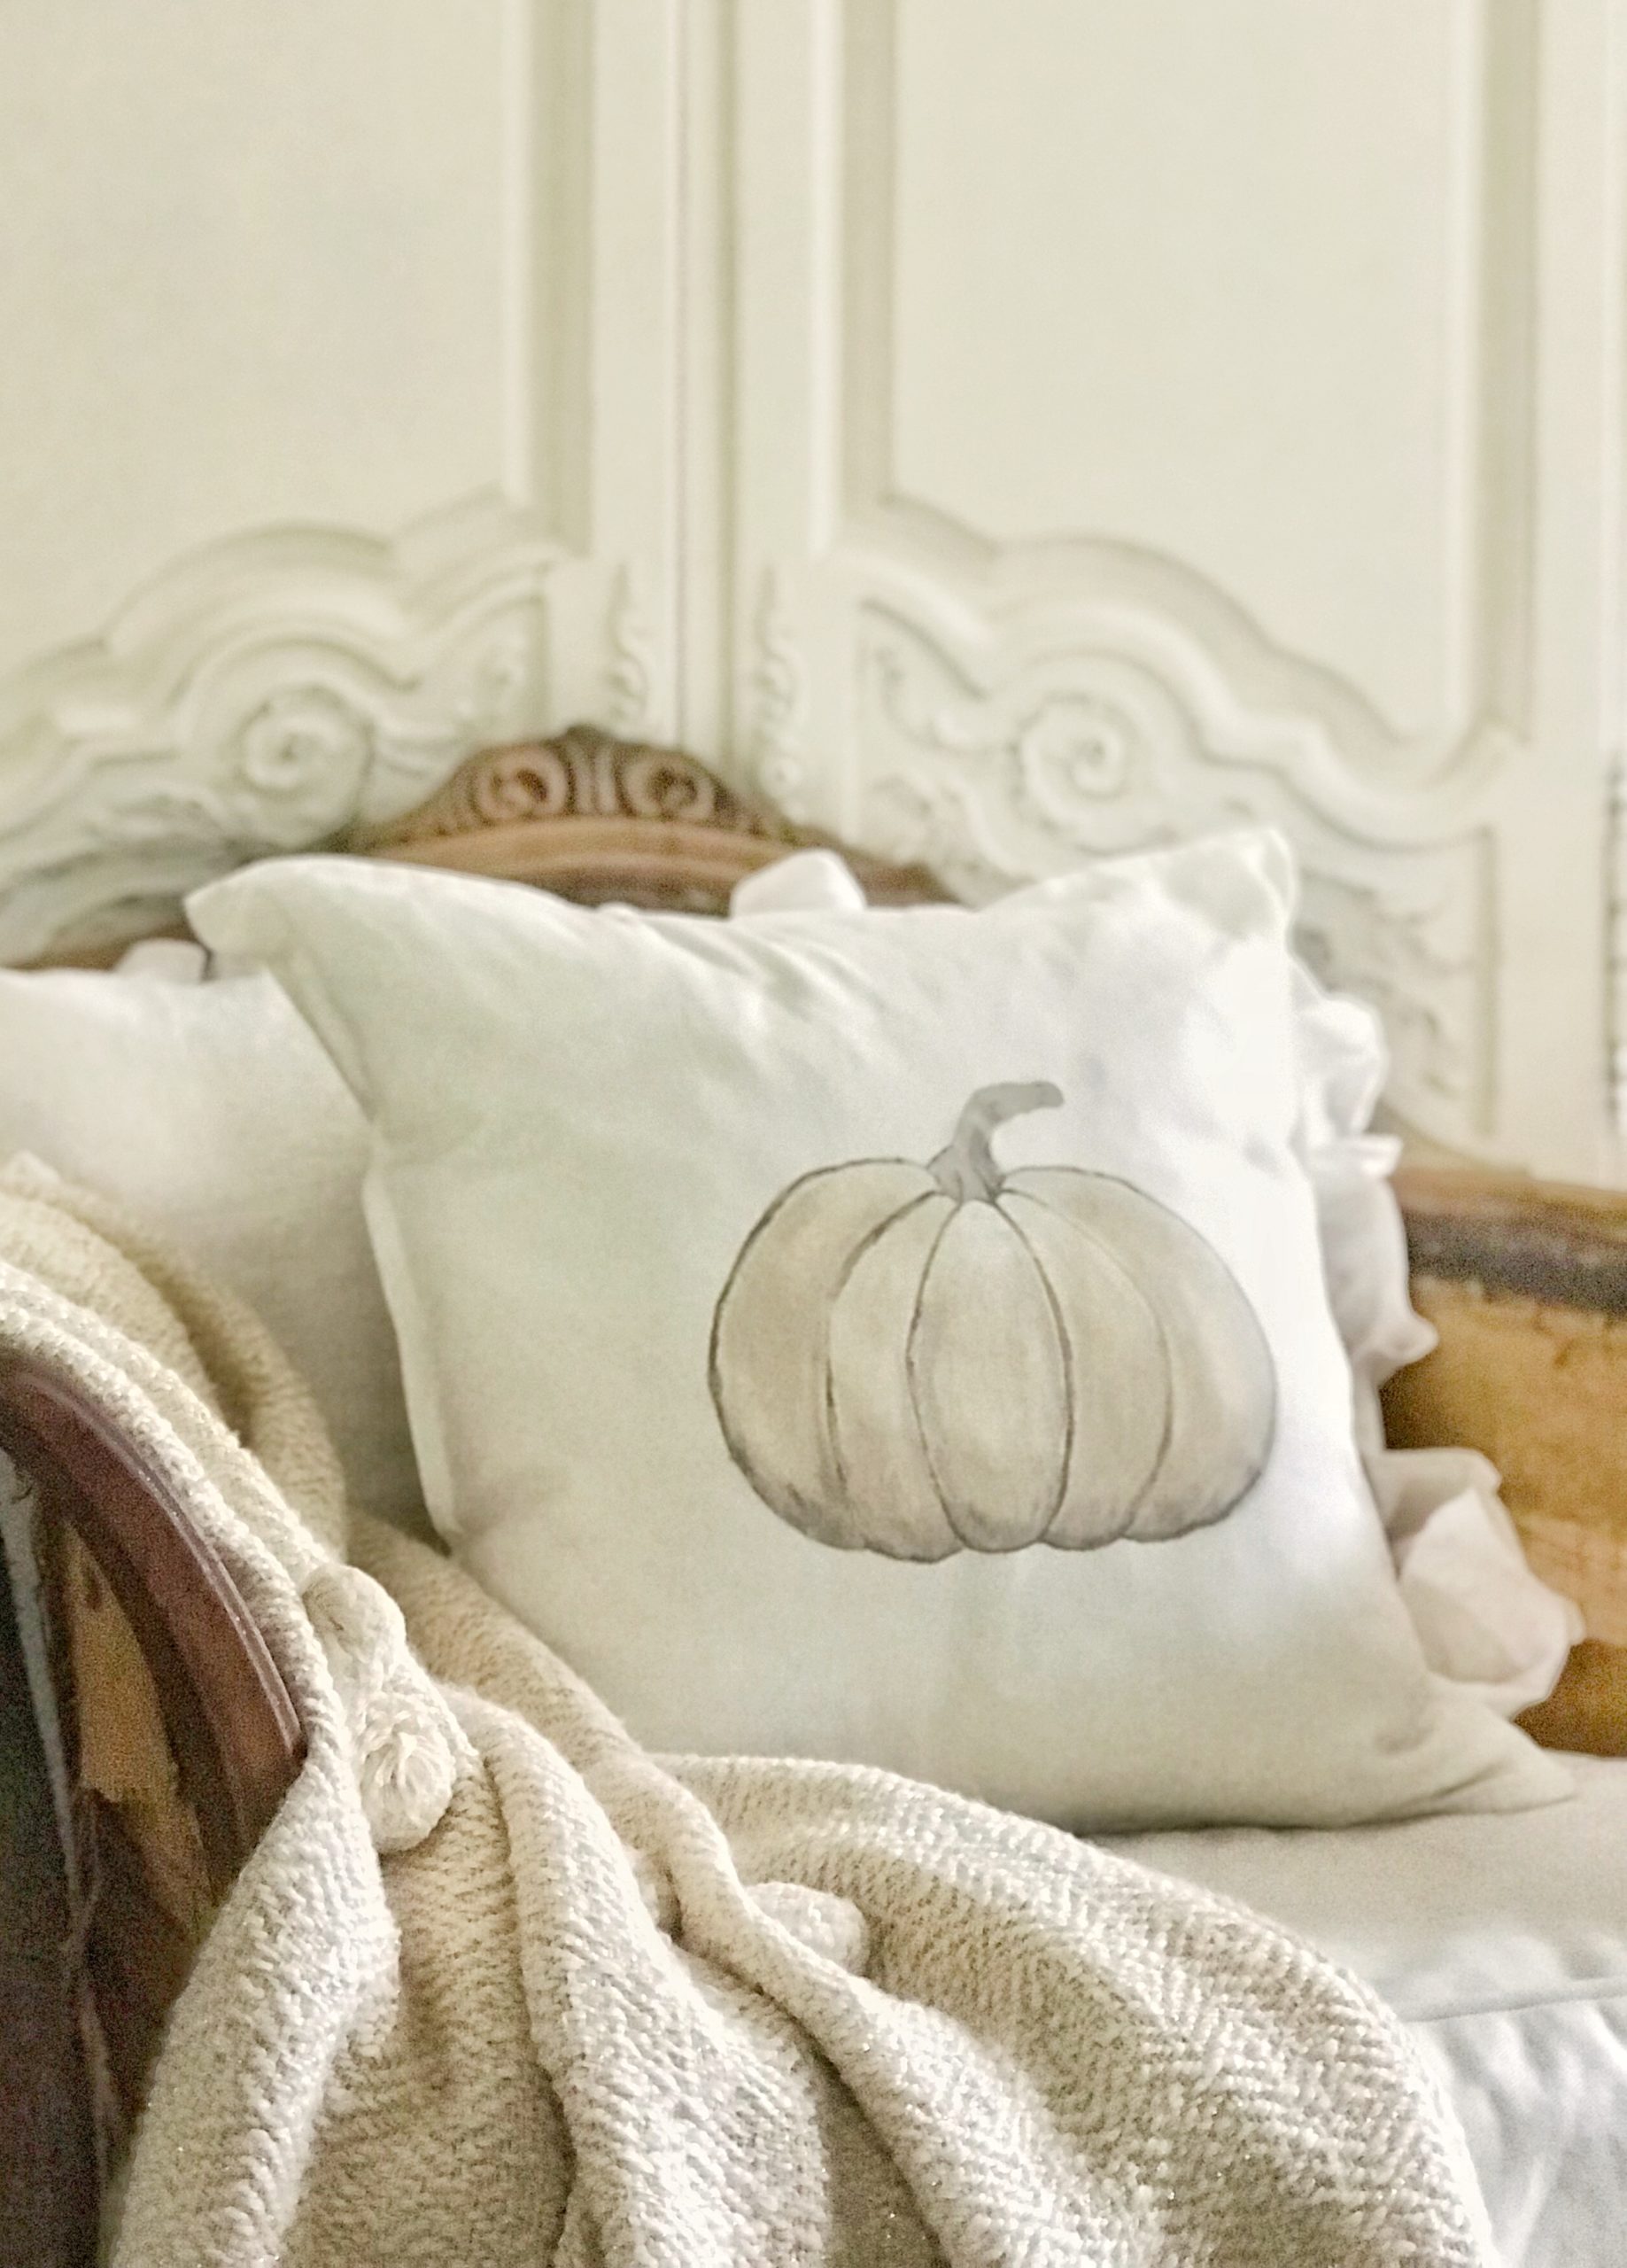 How to Make Cute Hand Painted Pumpkin Pillows for Fall